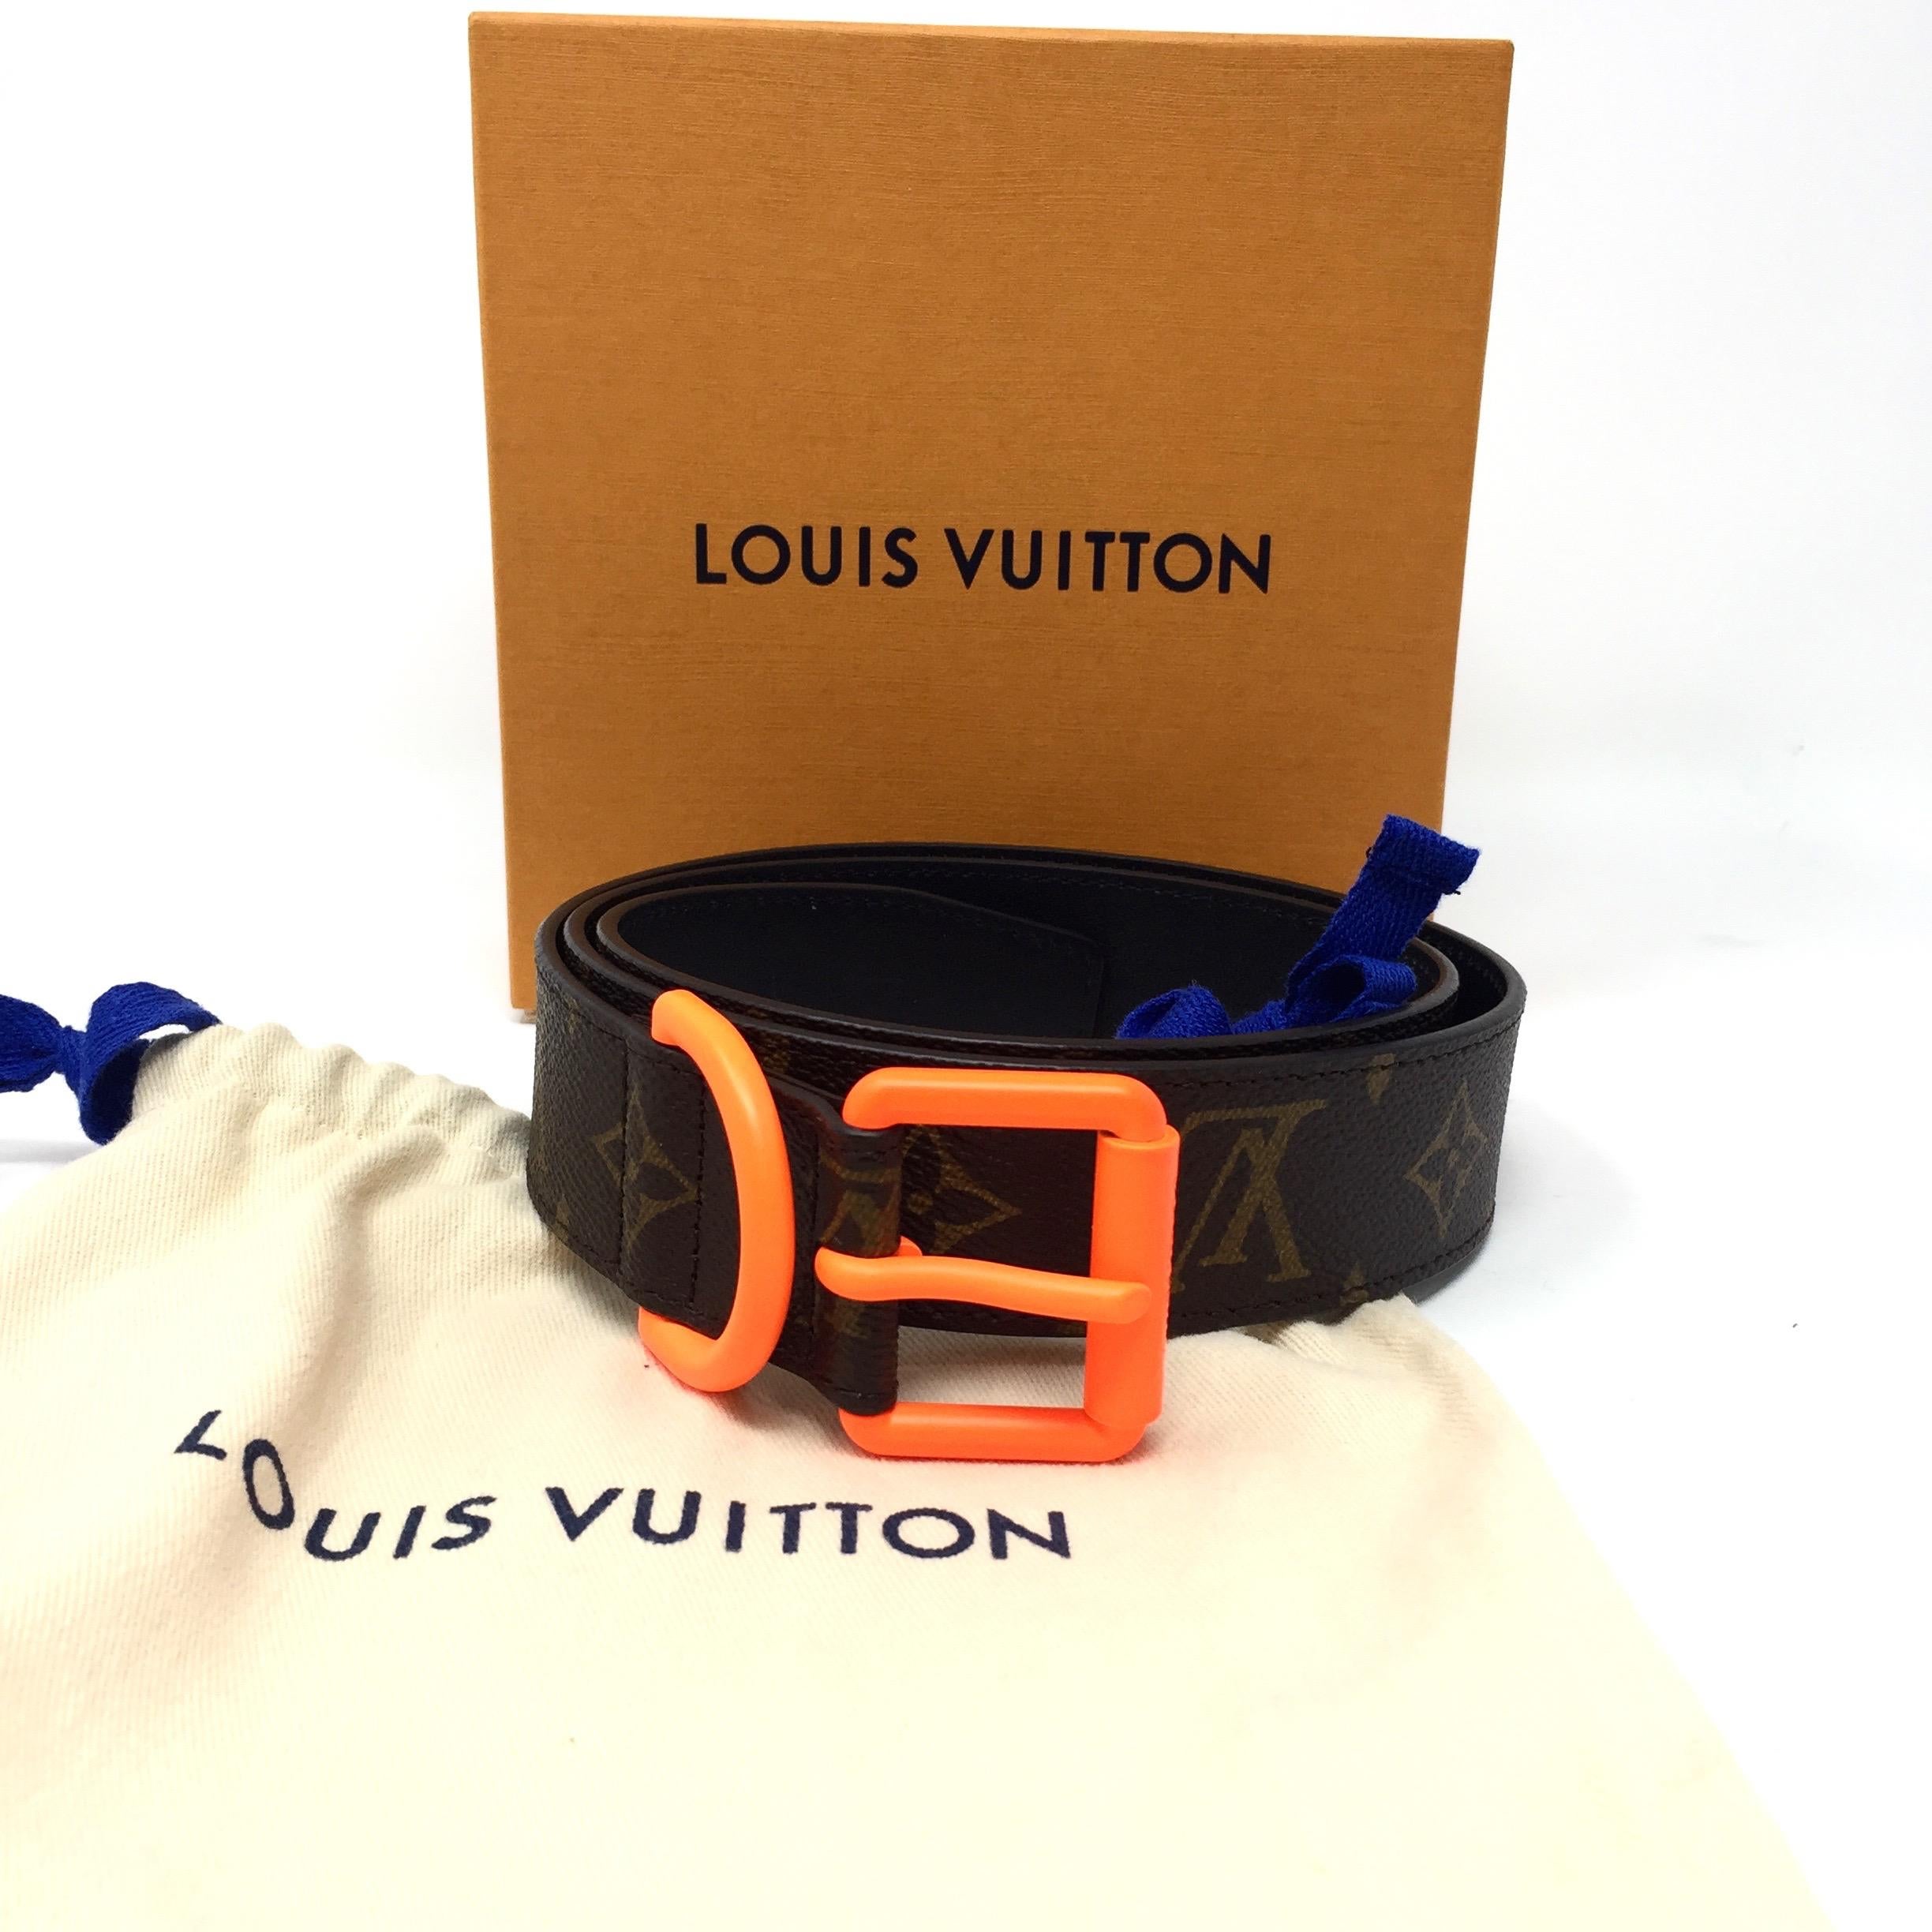  Brand New; Louis Vuitton Monogram Solar Rey Belt w/ Orange Buckle.
This item was exclusive London Pop-Up store realese for the SS19 collection. 'Very exclusive'
First collection of ther new Creative Director Virgil Abloh
Comes with the dustbag, box